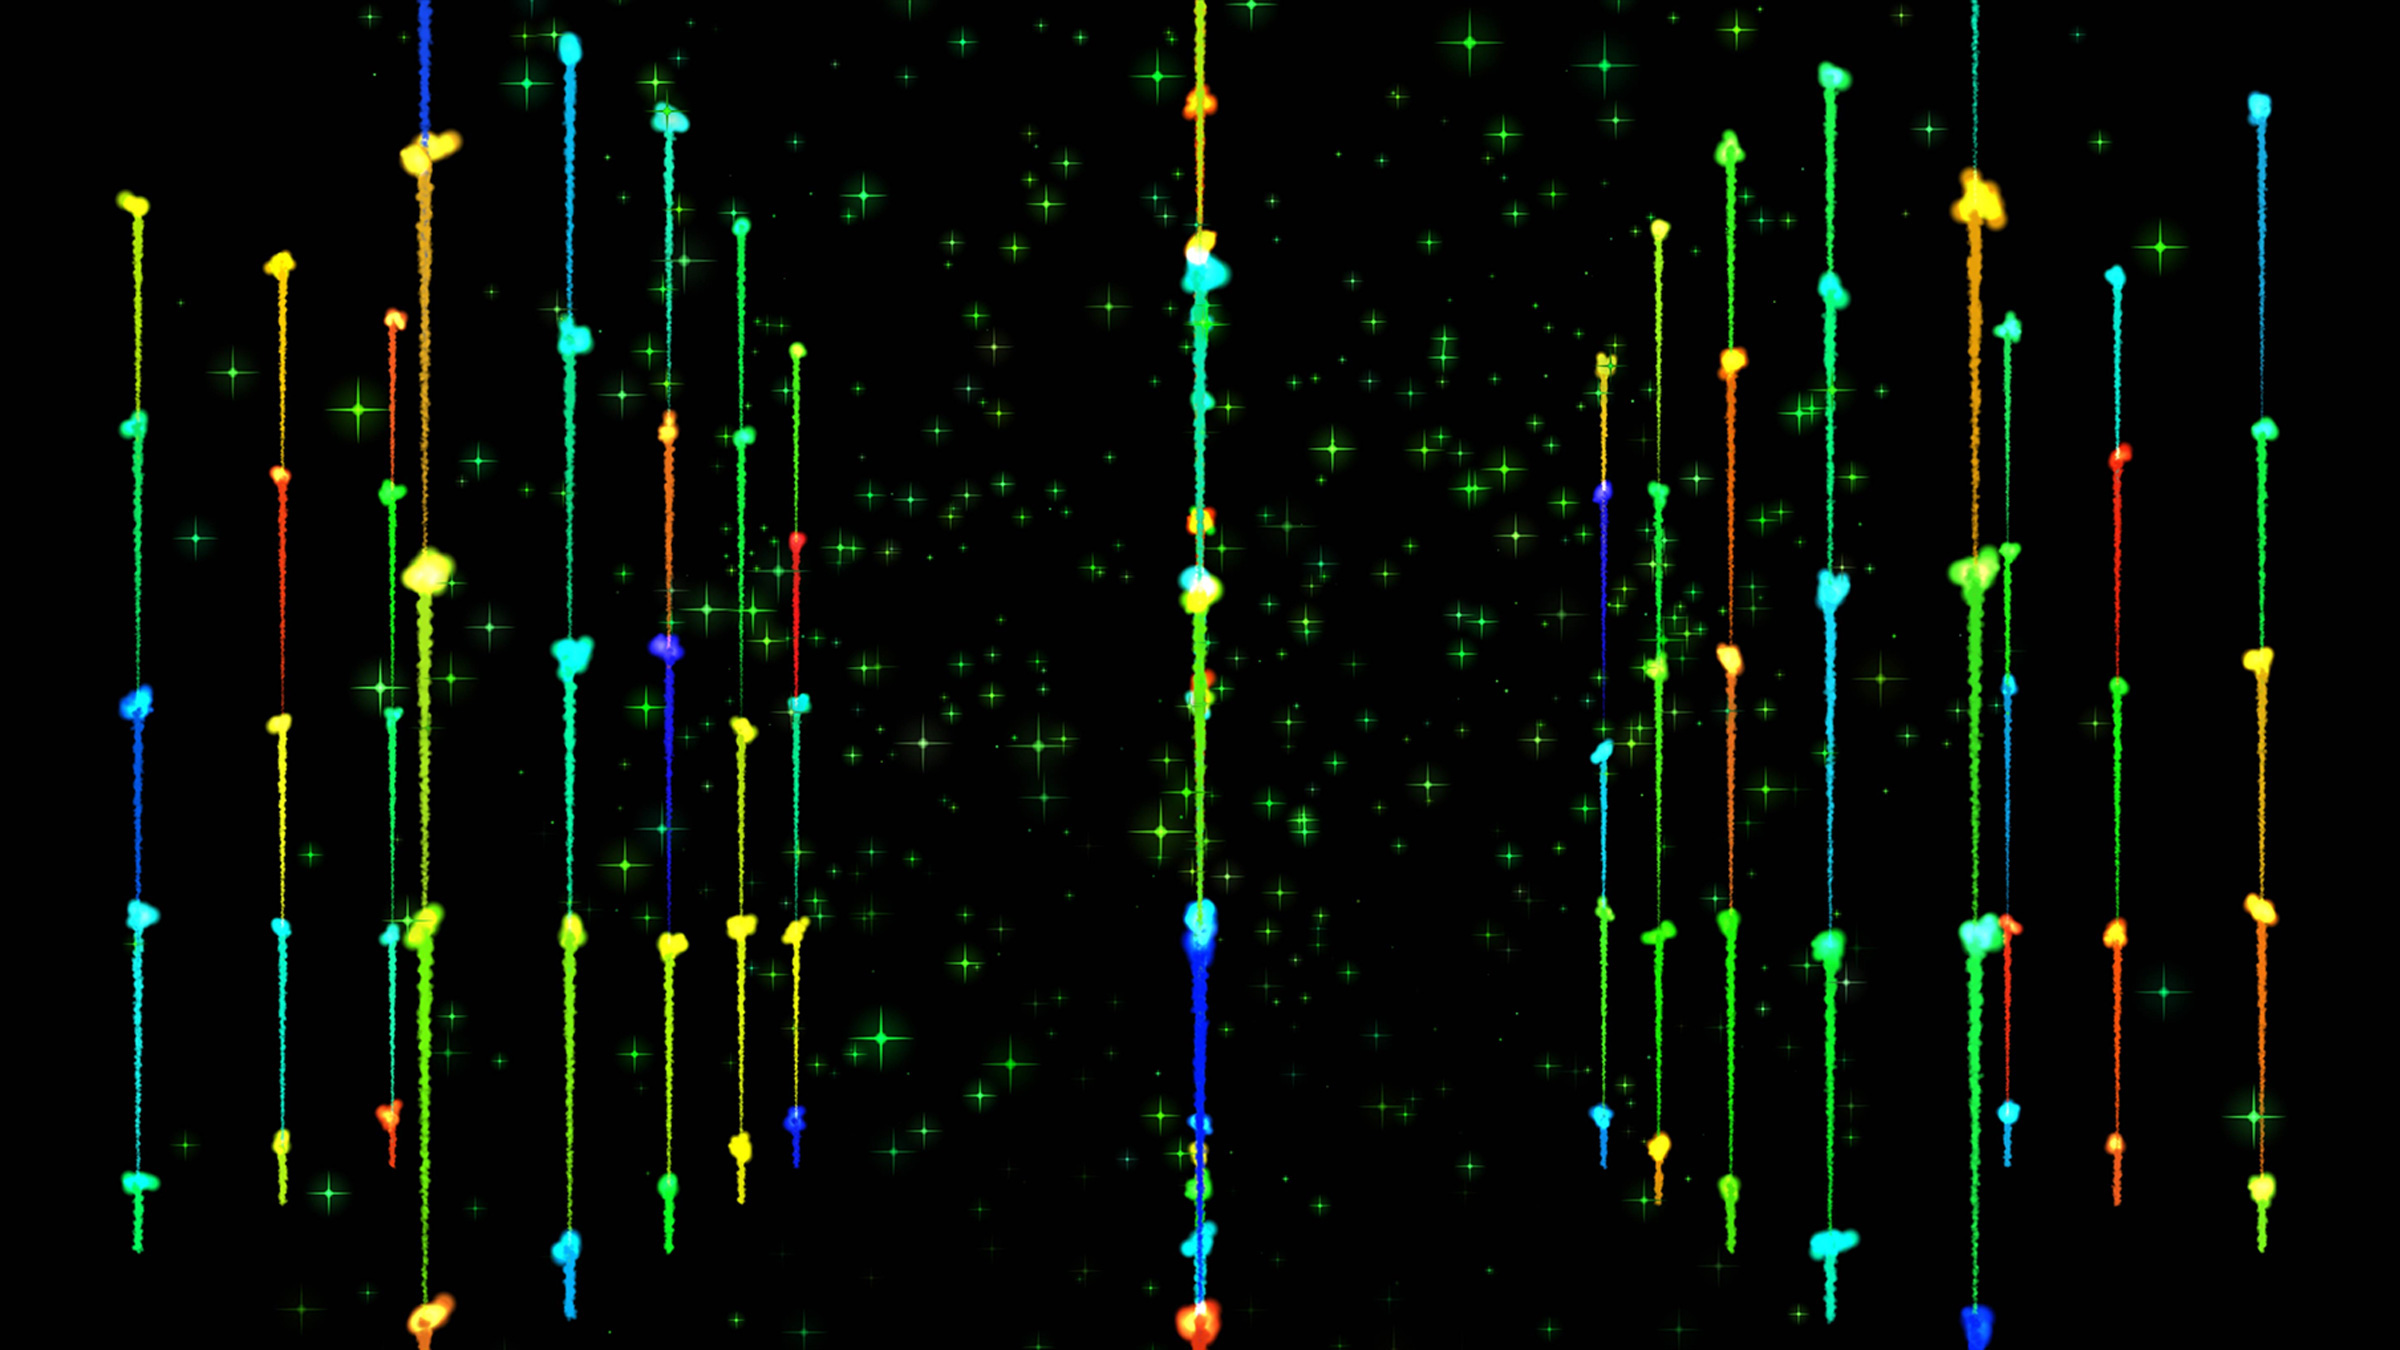 rows of colored lights in space, illustration